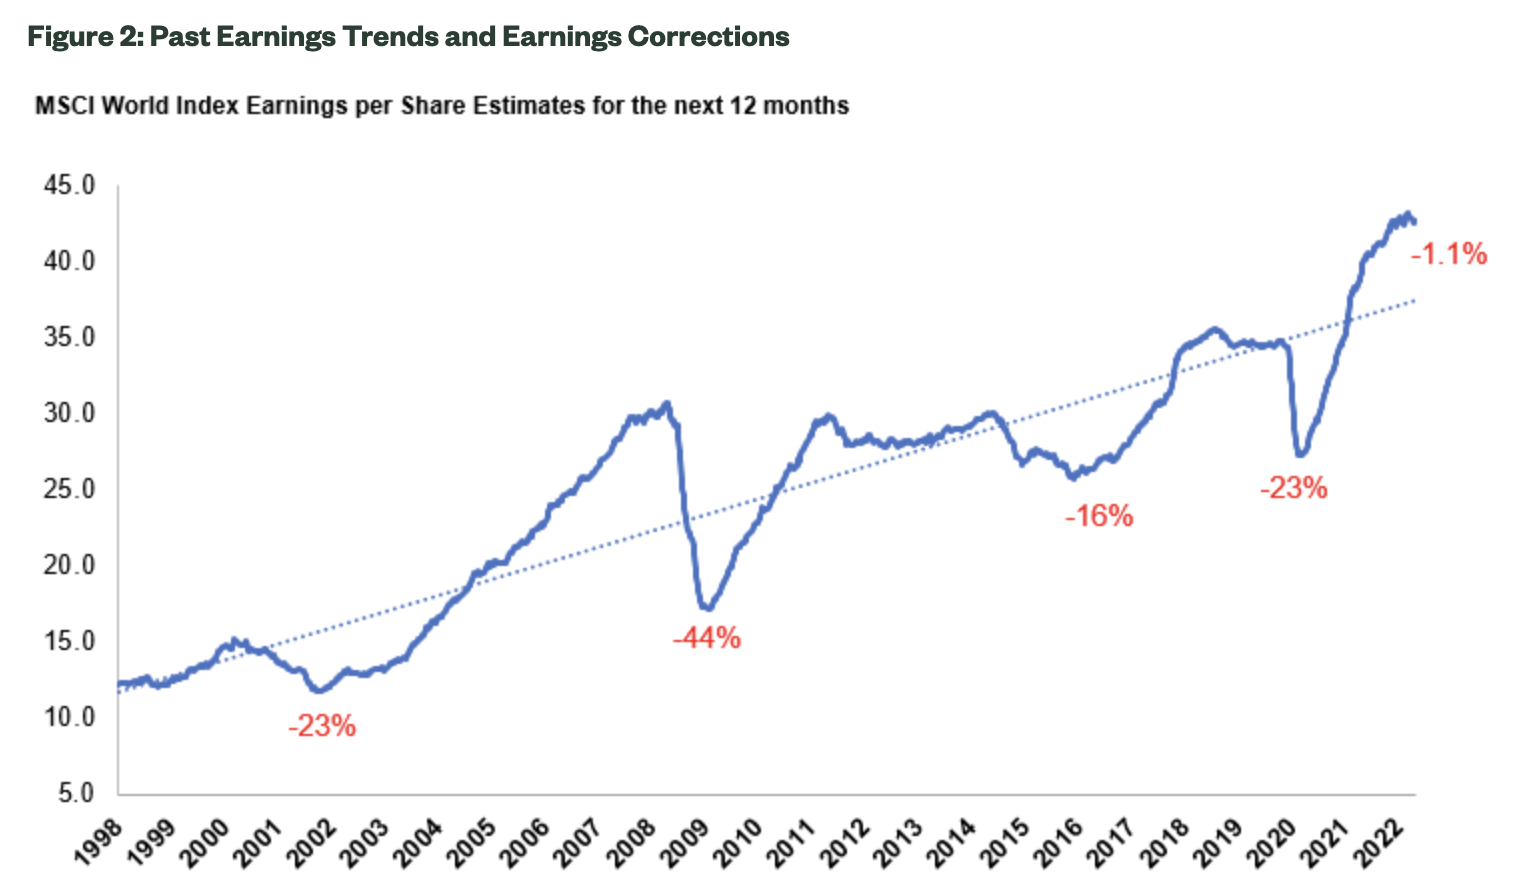 Source: State Street Global Advisors, Factset, as at 5 August 2022. MSCI World Index earnings per share for the next 12 months from April 1998 to August 2022. Earnings corrections are defined as corrections of more than 15% corrections in earnings per share estimates for the next 12 months.